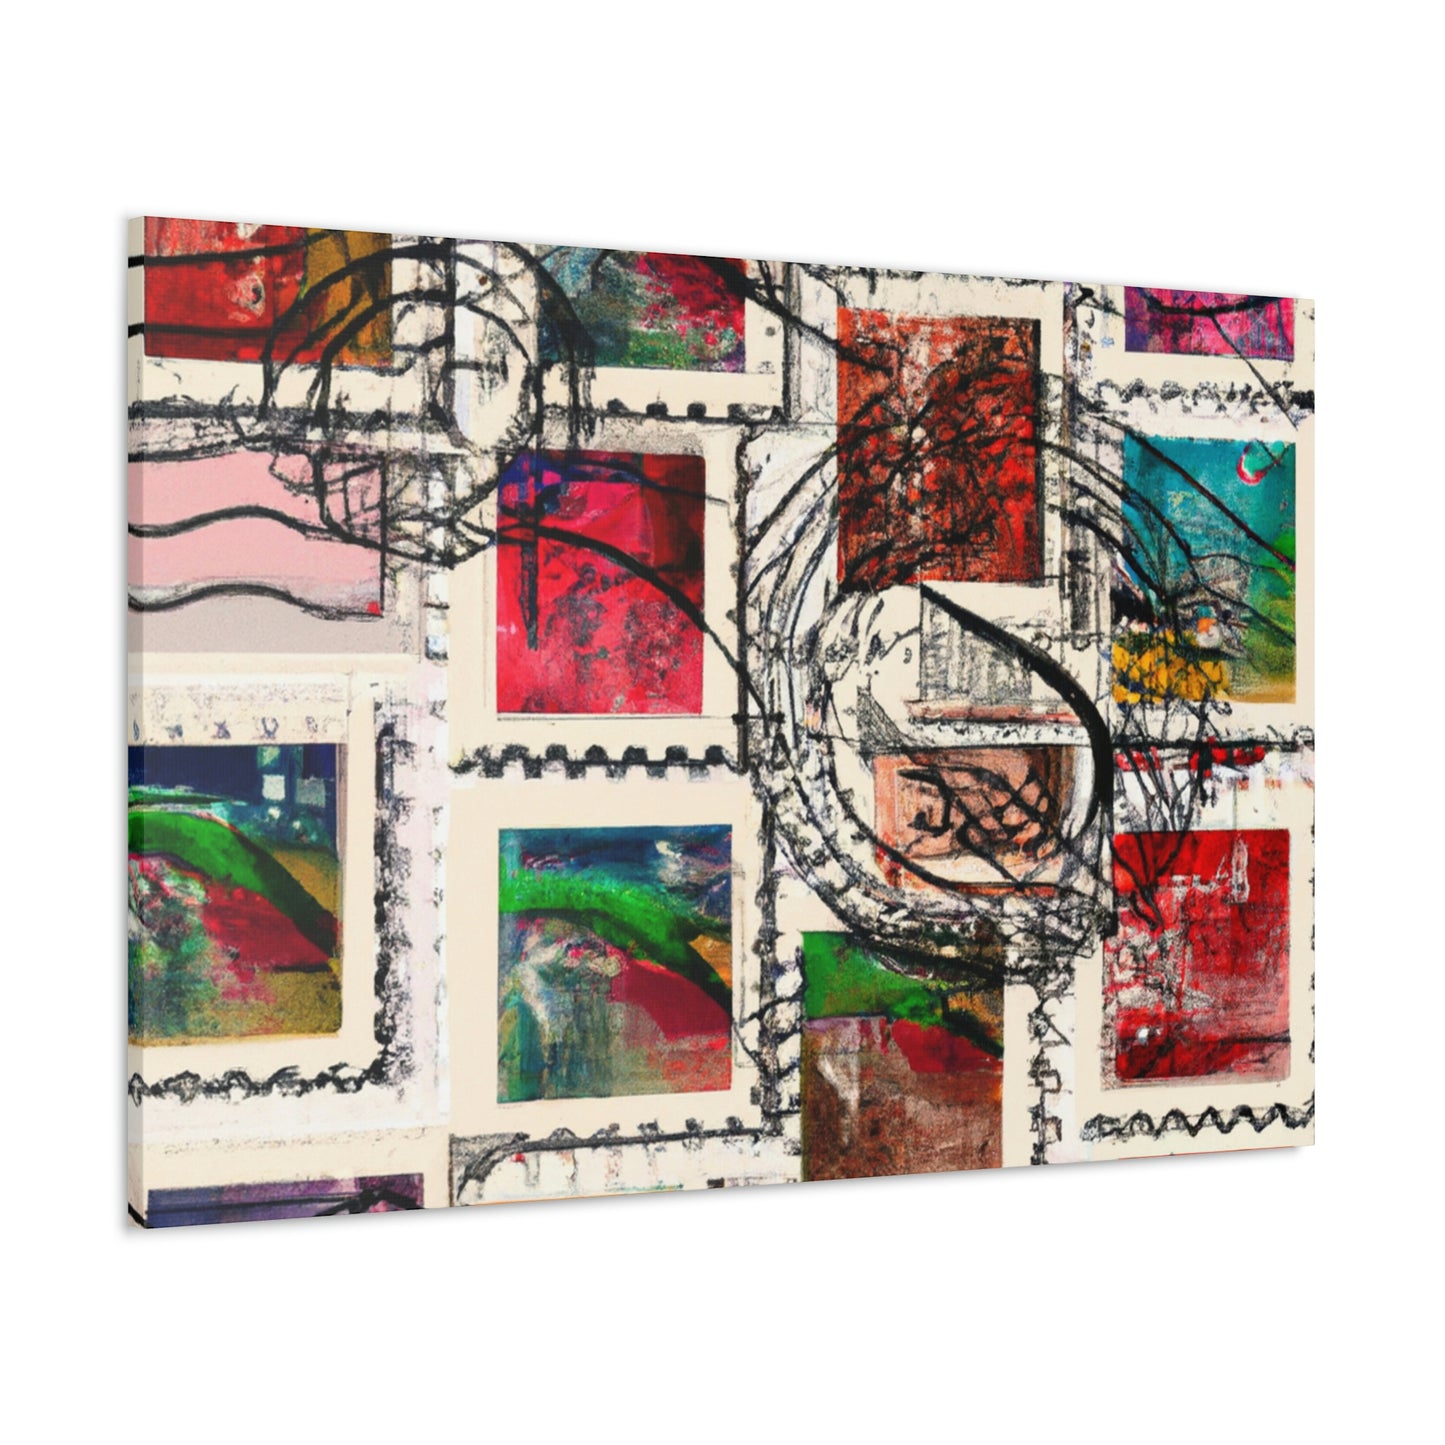 International Masterpieces of Philately Stamps - Postage Stamp Collector Canvas Wall Art